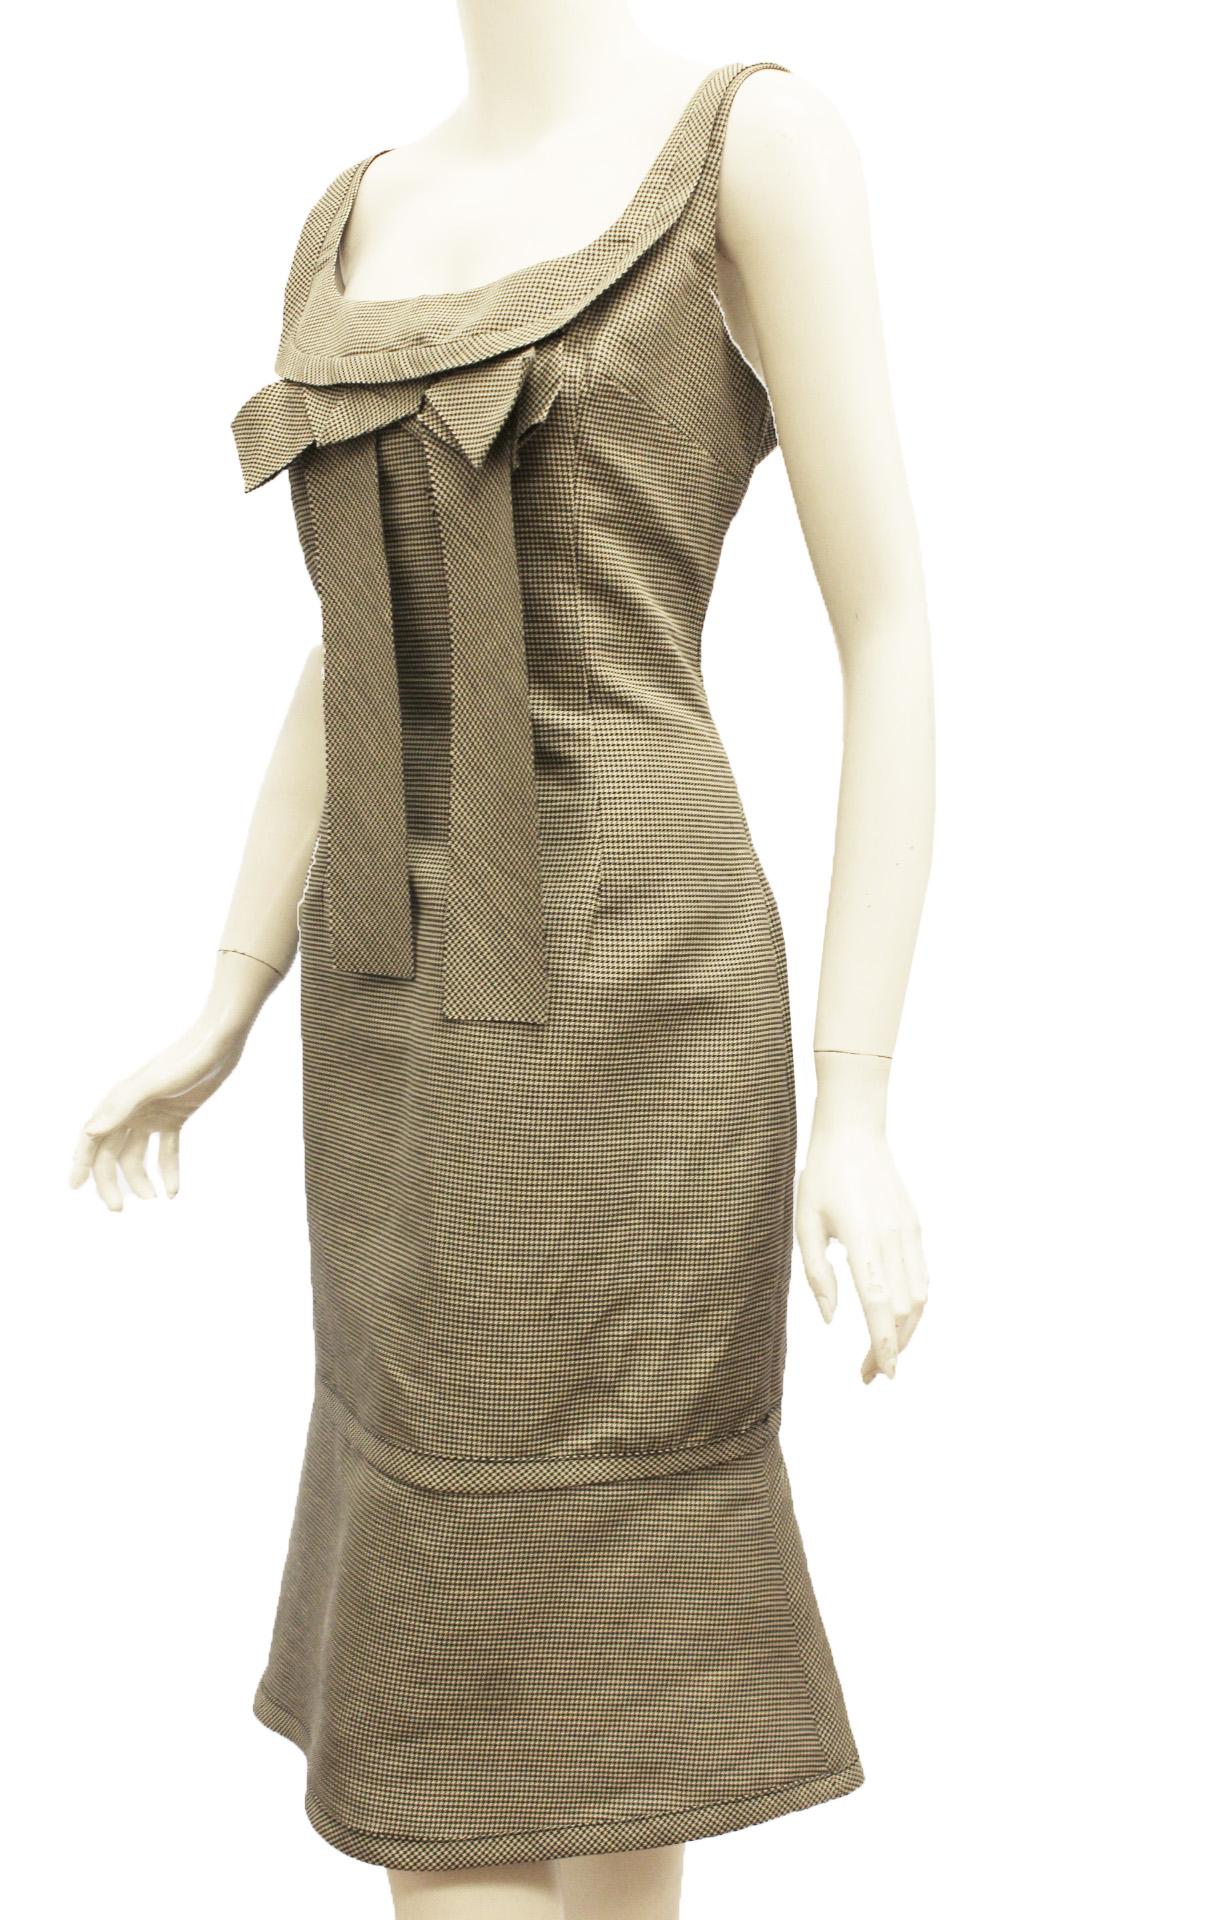 Charles Chang-Lima black and white check linen and silk sleeveless dress contains a decorative flat bow at front around neckline that falls to the waist.  For closure a hidden back zipper.  At the back, a pleated vent is located on the wide hem.